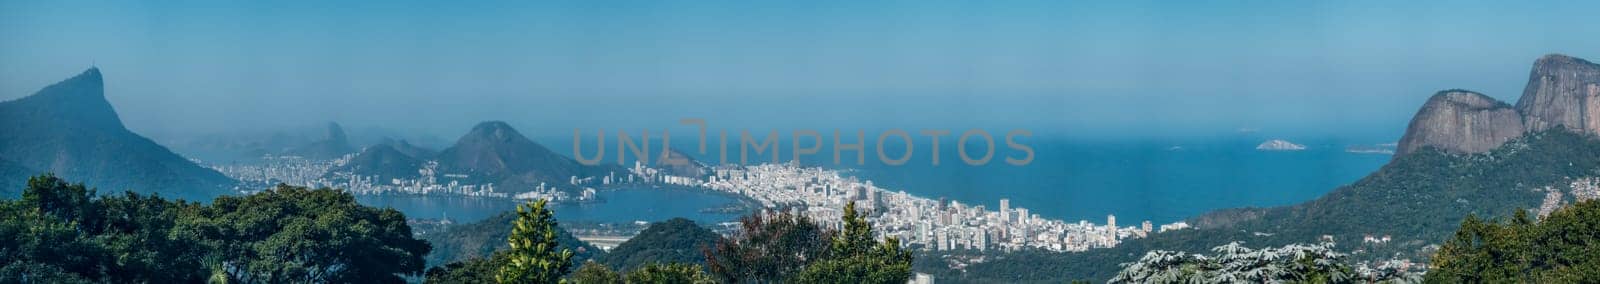 Panoramic view of Rio de Janeiro's cityscape, illustrating its iconic skyline and landmarks.